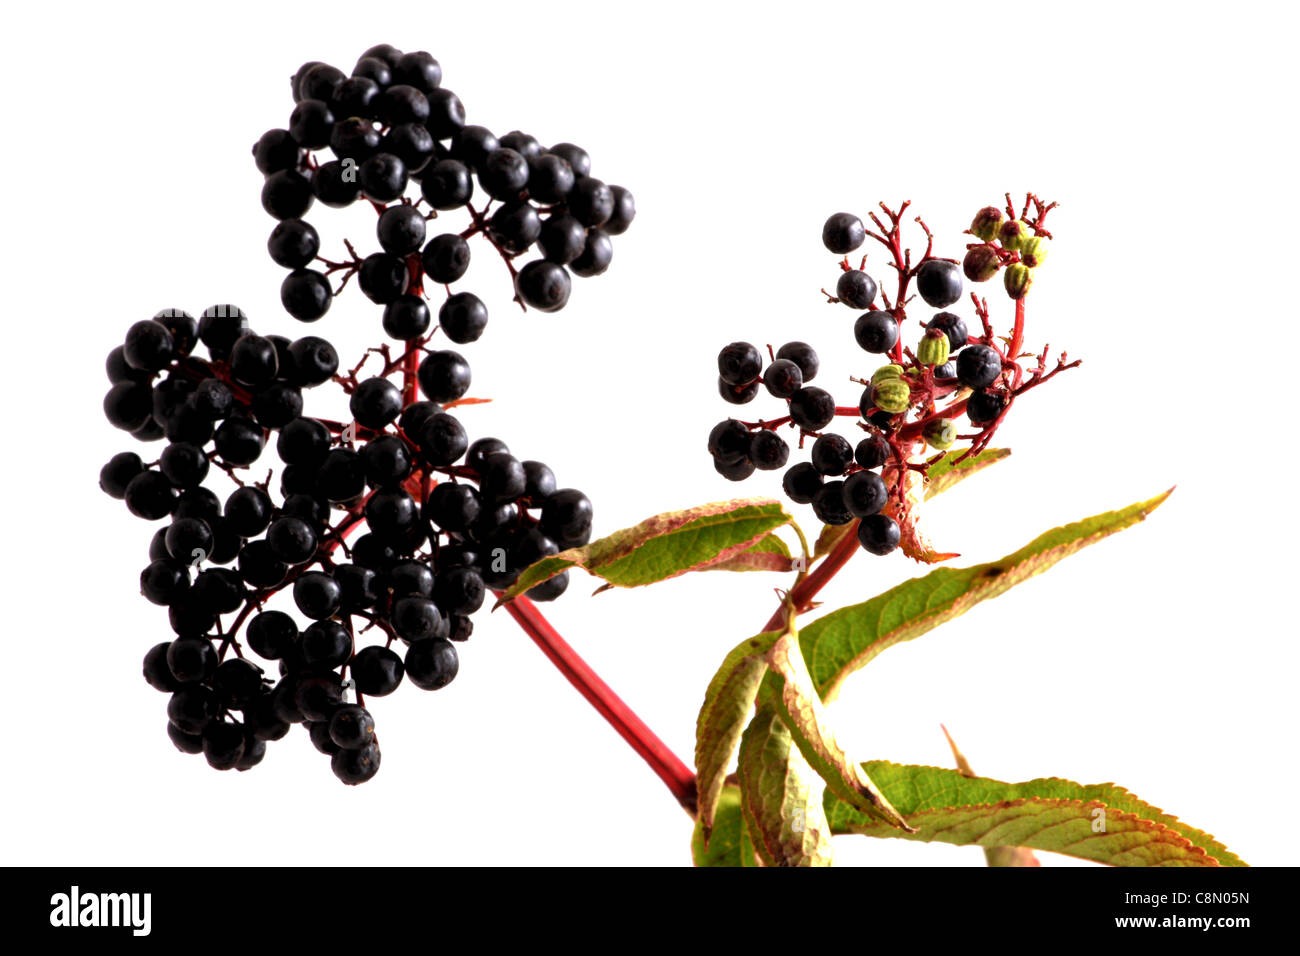 Sambucus nigra - Elder - The flowers and berries are used most often medicinally against flu and fever, angina, etc. Stock Photo